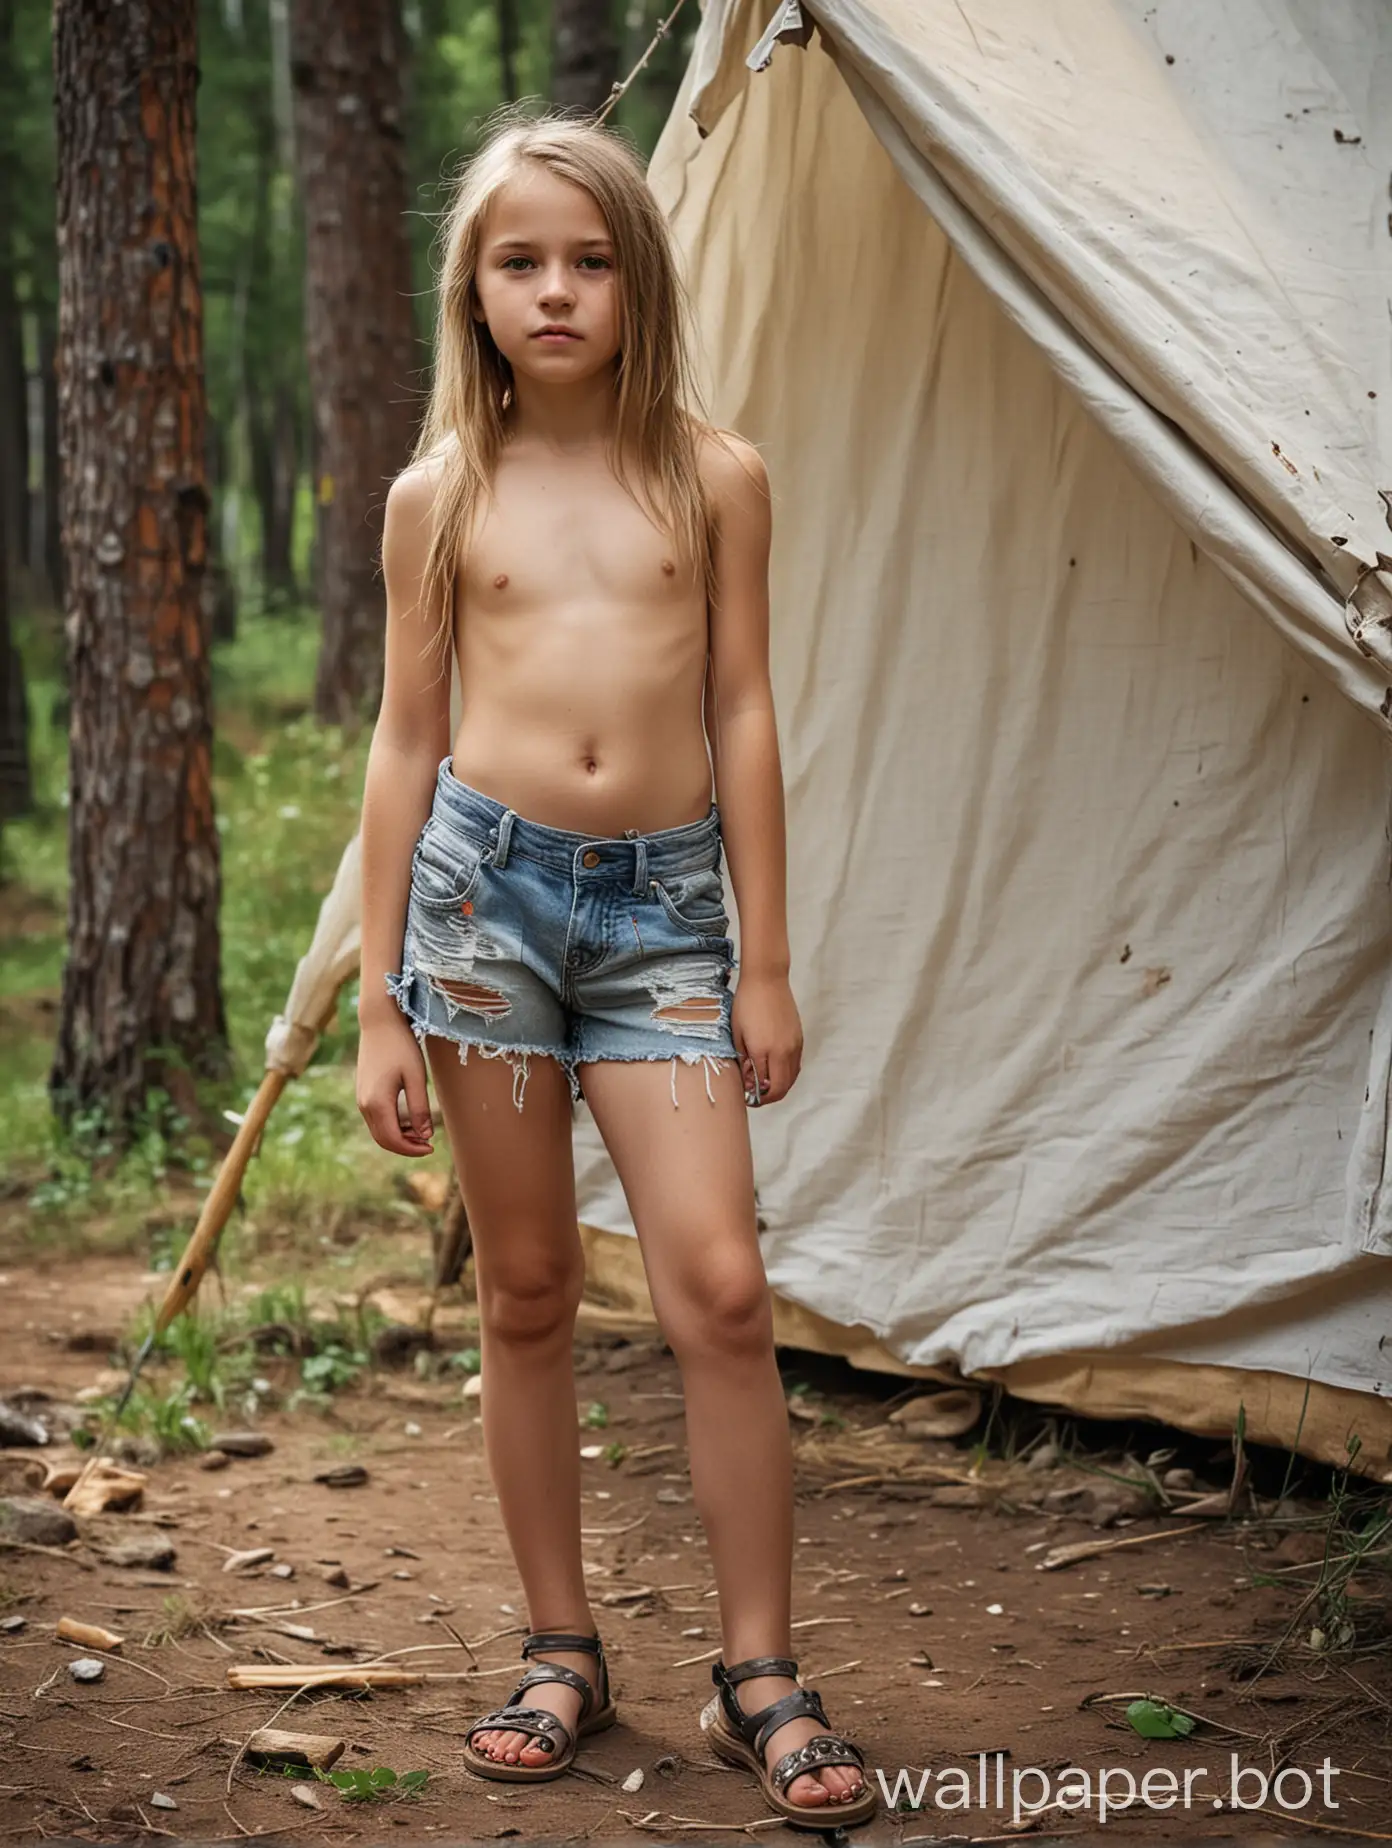 beautiful Russian girl 10 years old wearing only tattered shorts and sandals near a tent, forest, people on the background, full length, dynamic poses, hiding from people, side view, dynamics